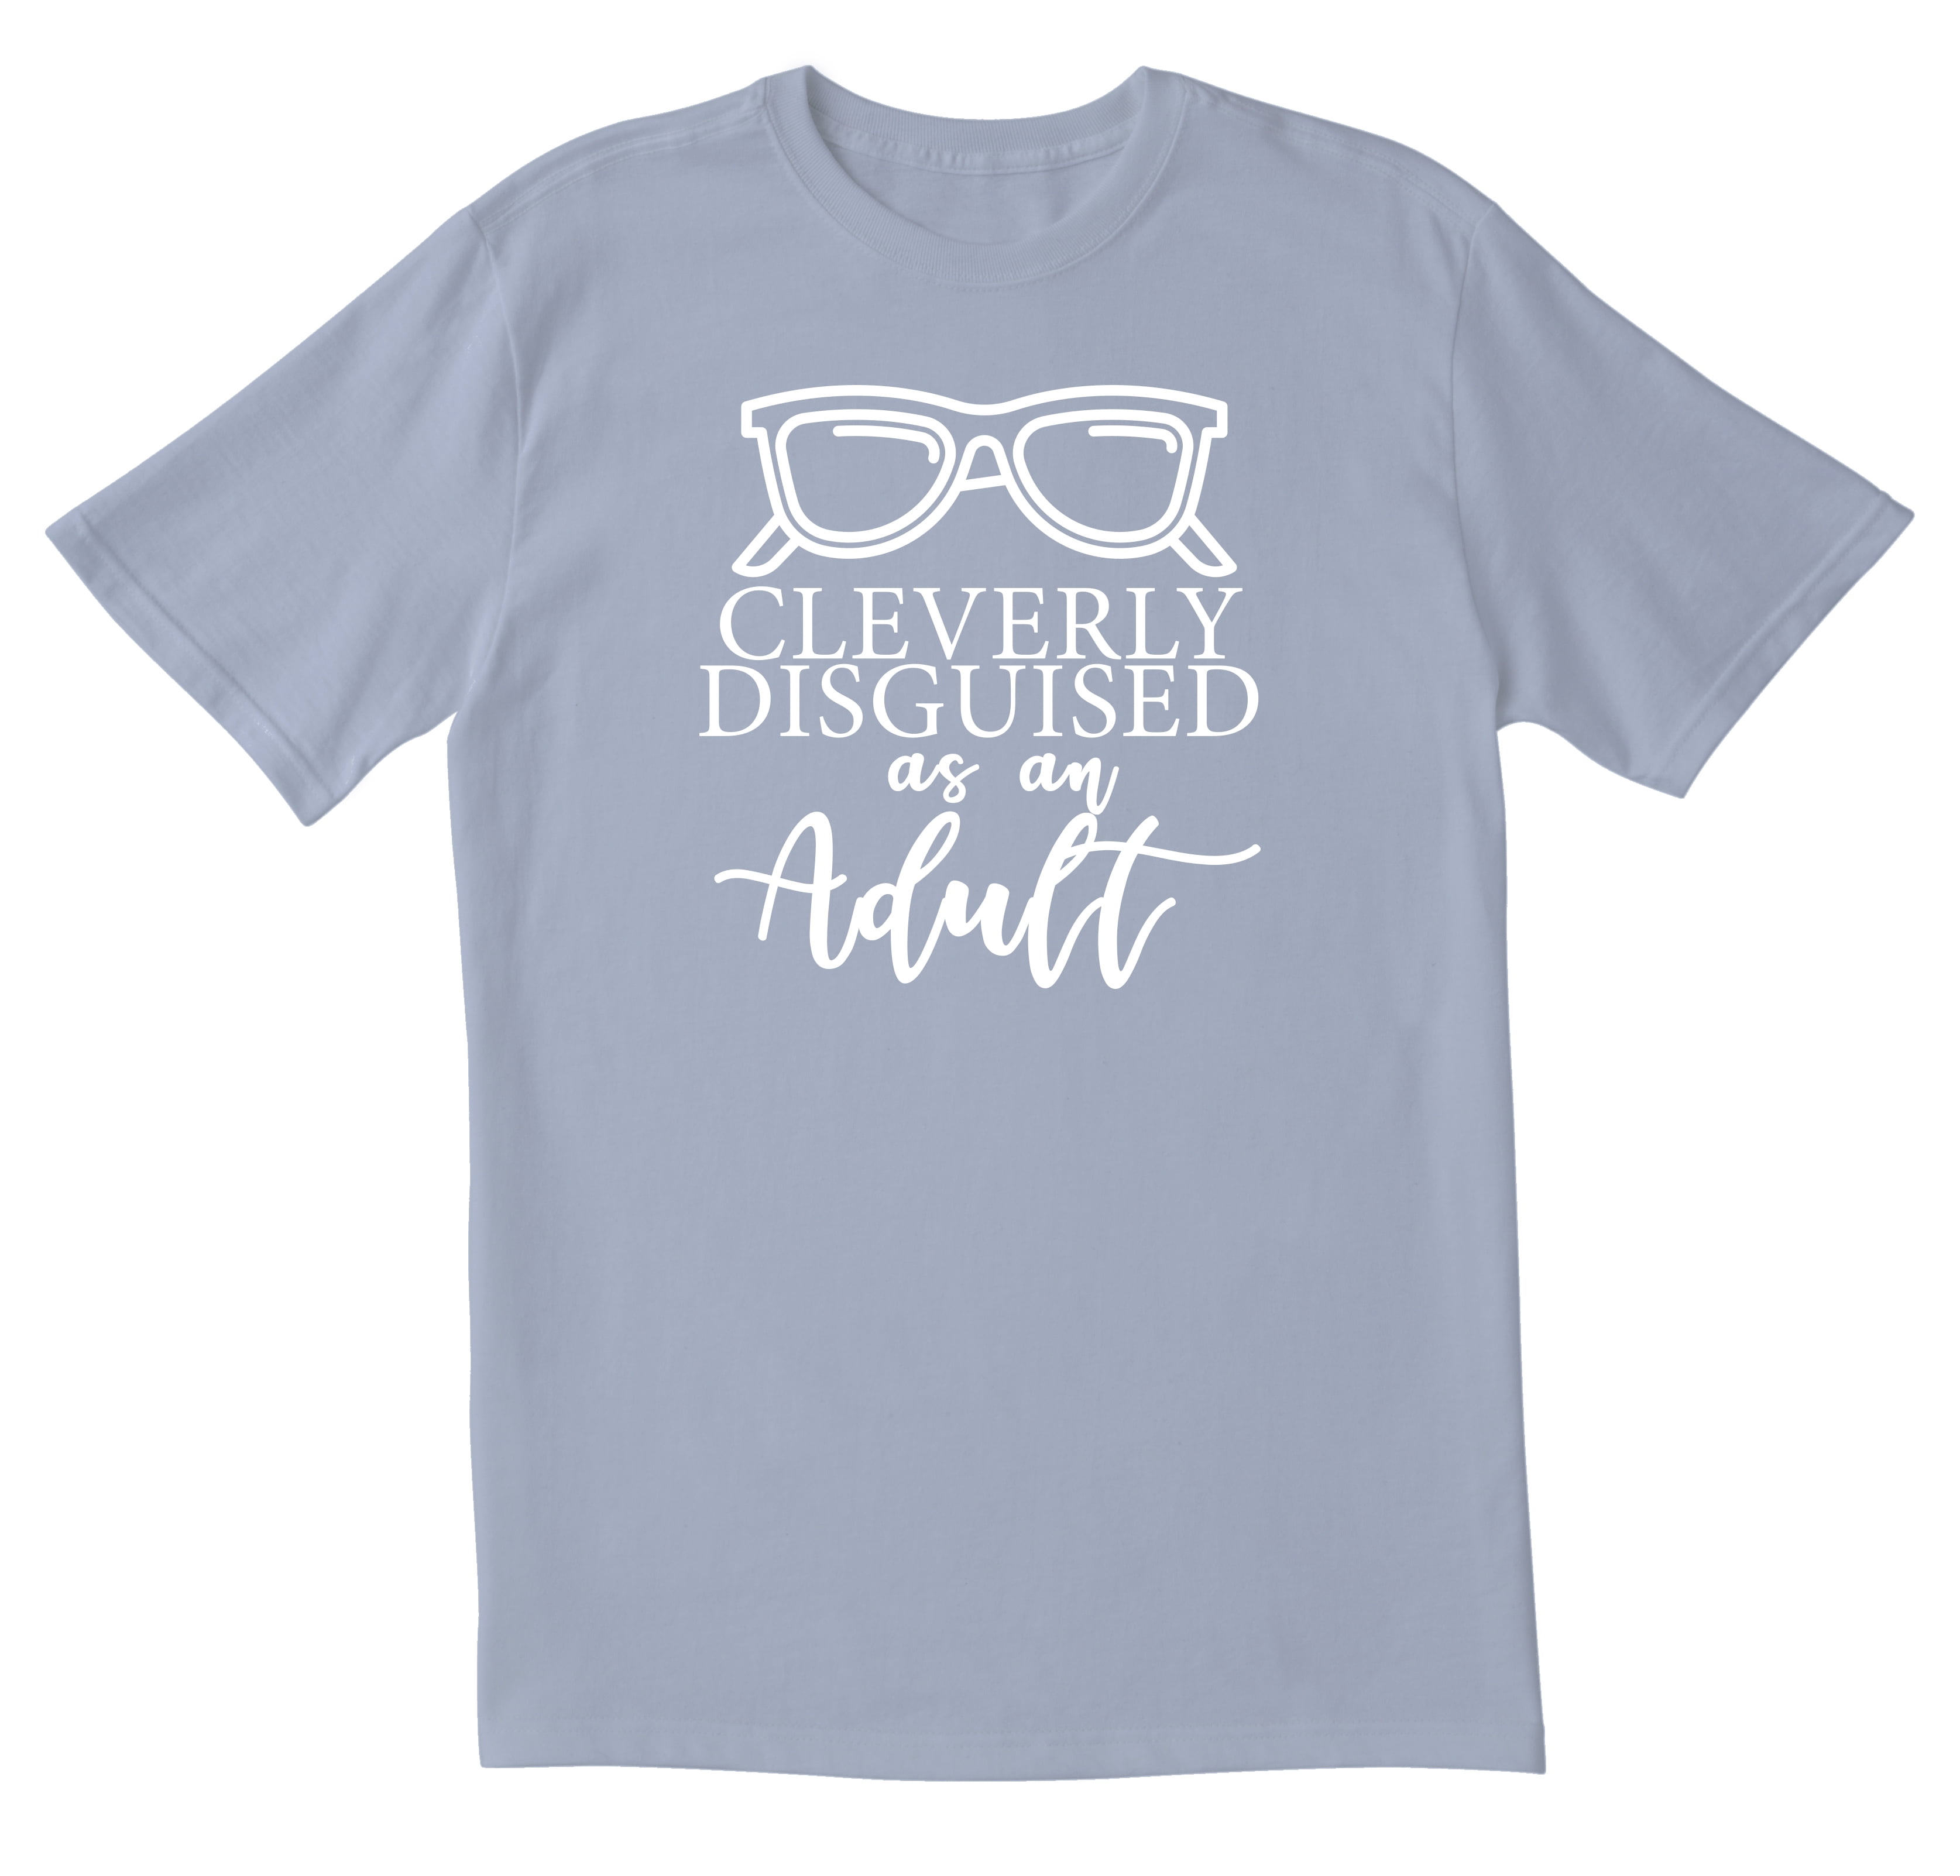 Funny Humor Men's Gift  Novelty T-Shirt CLEVERLY DISGUISED AS AN ADULT 